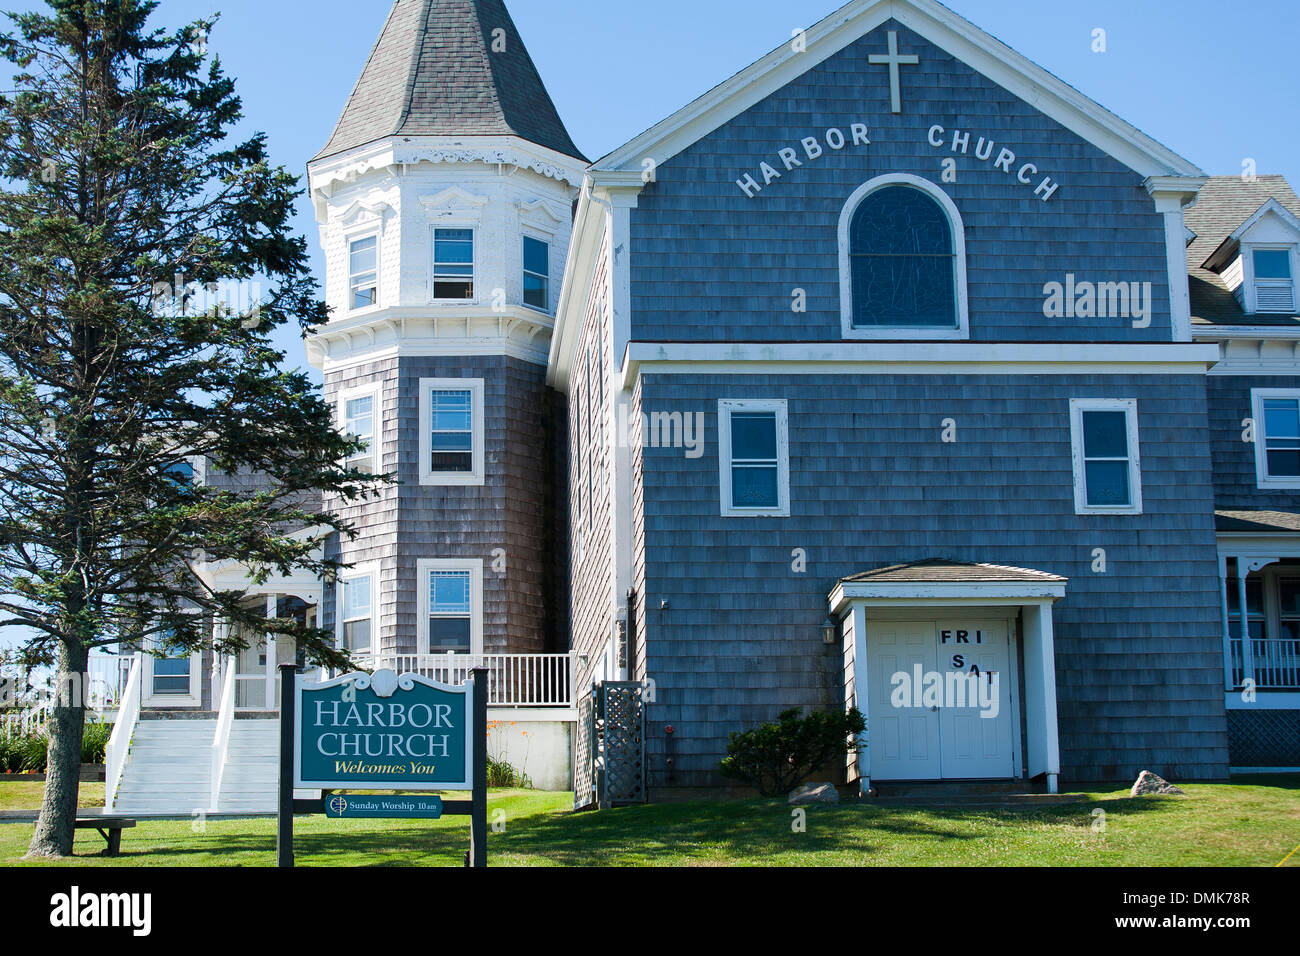 The harbor church in Old Harbor on Block island, Rhode Island, USA, a popular New England vacation location Stock Photo